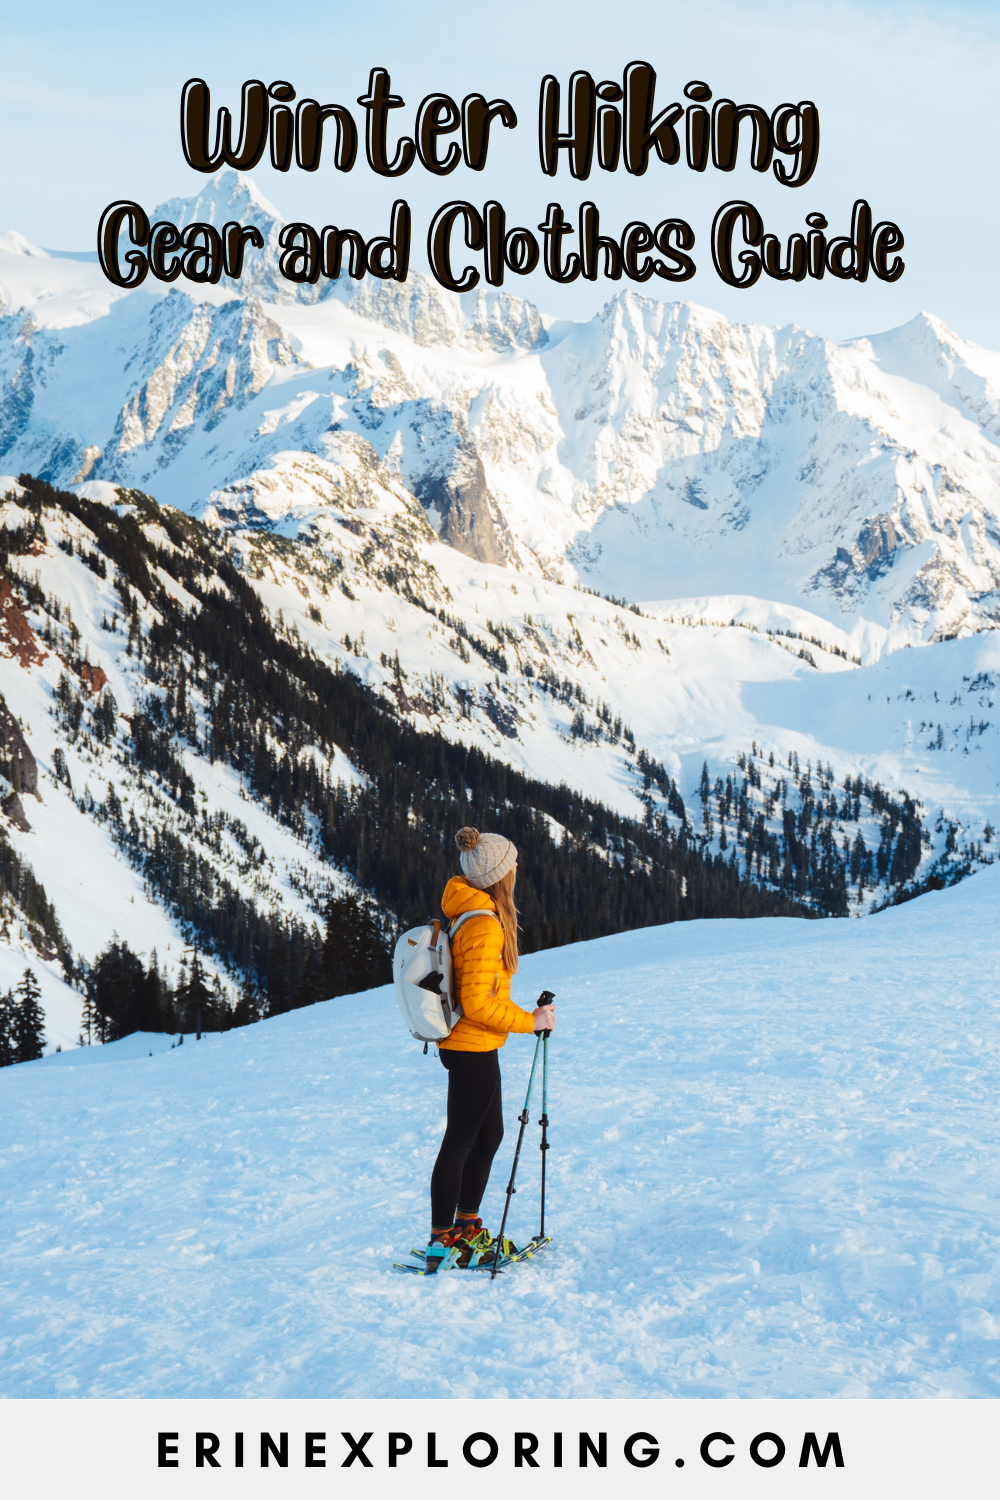 Best Winter Hiking Gear - What to Wear While Hiking in the Winter